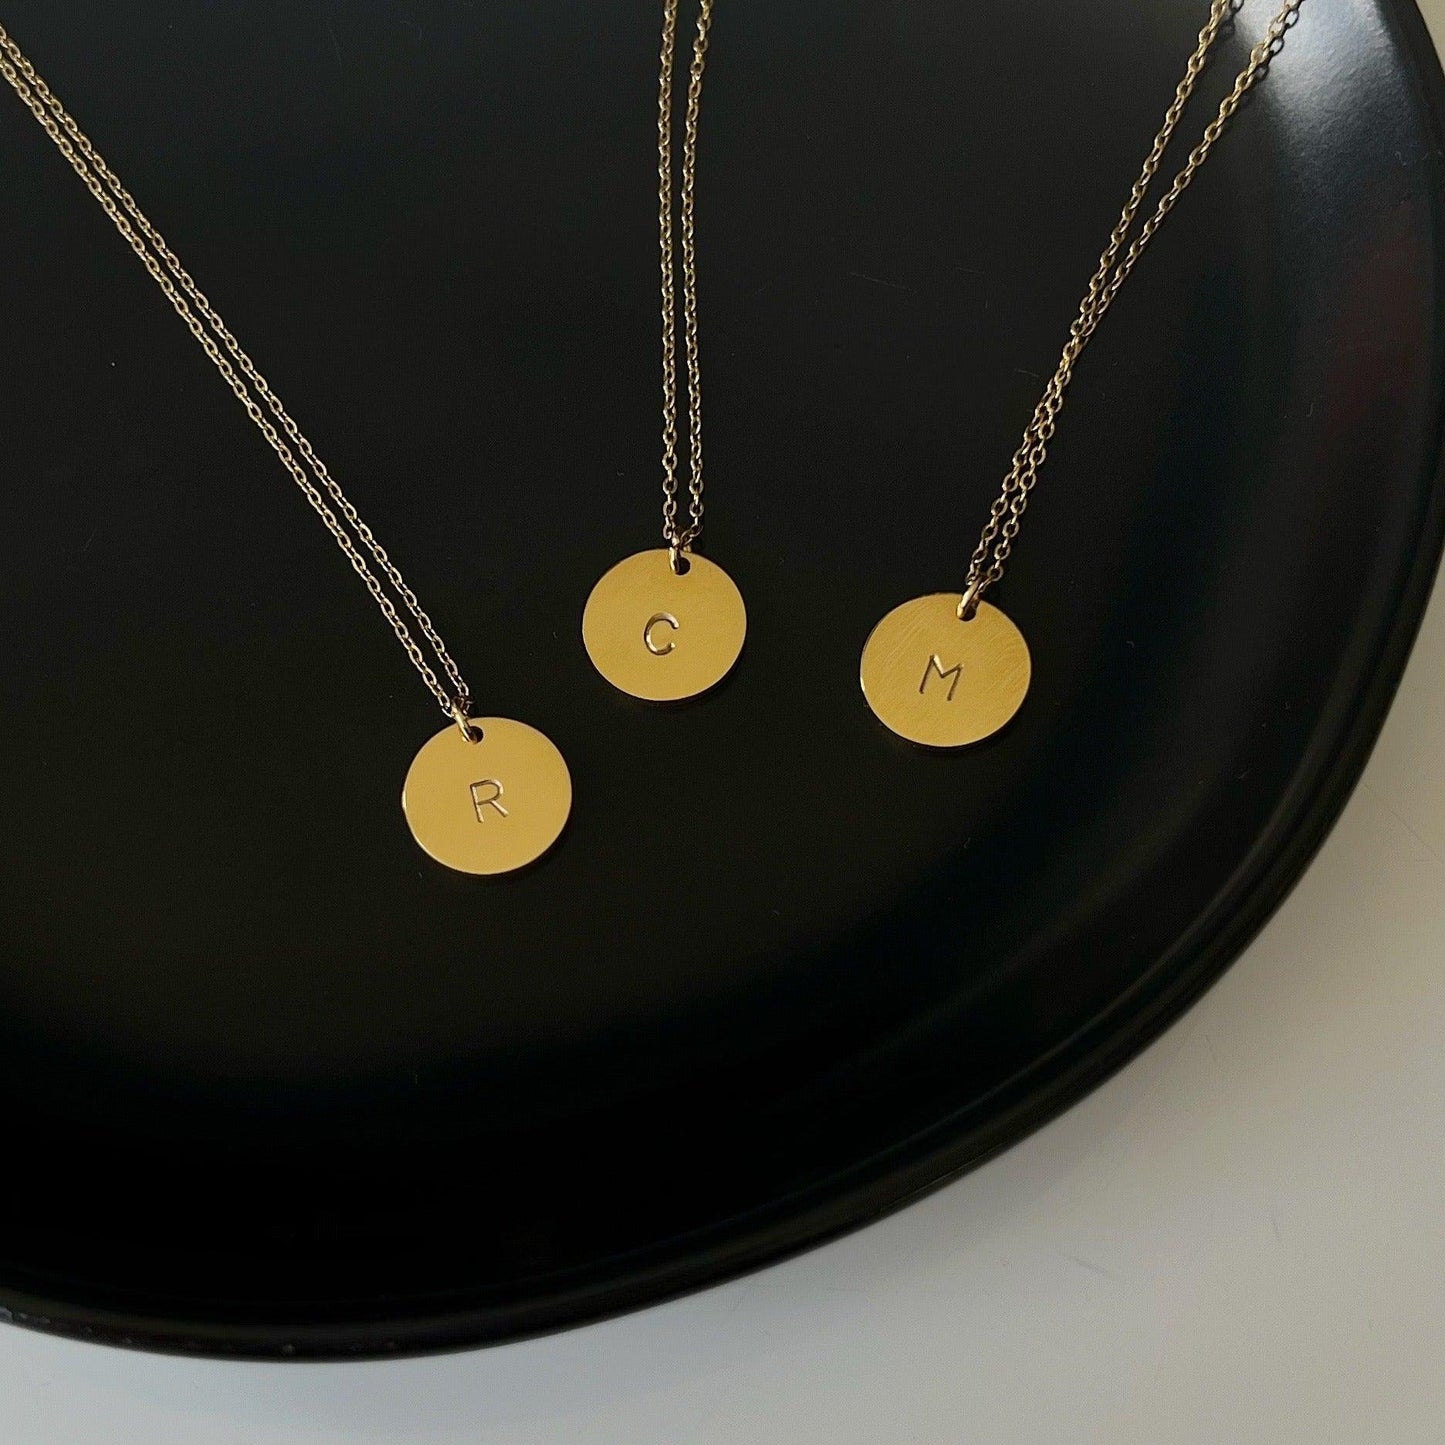 Hand Stamped Initial Disc Necklace - JESSA JEWELRY | GOLD JEWELRY; dainty, affordable gold everyday jewelry. Tarnish free, water-resistant, hypoallergenic. Jewelry for everyday wear